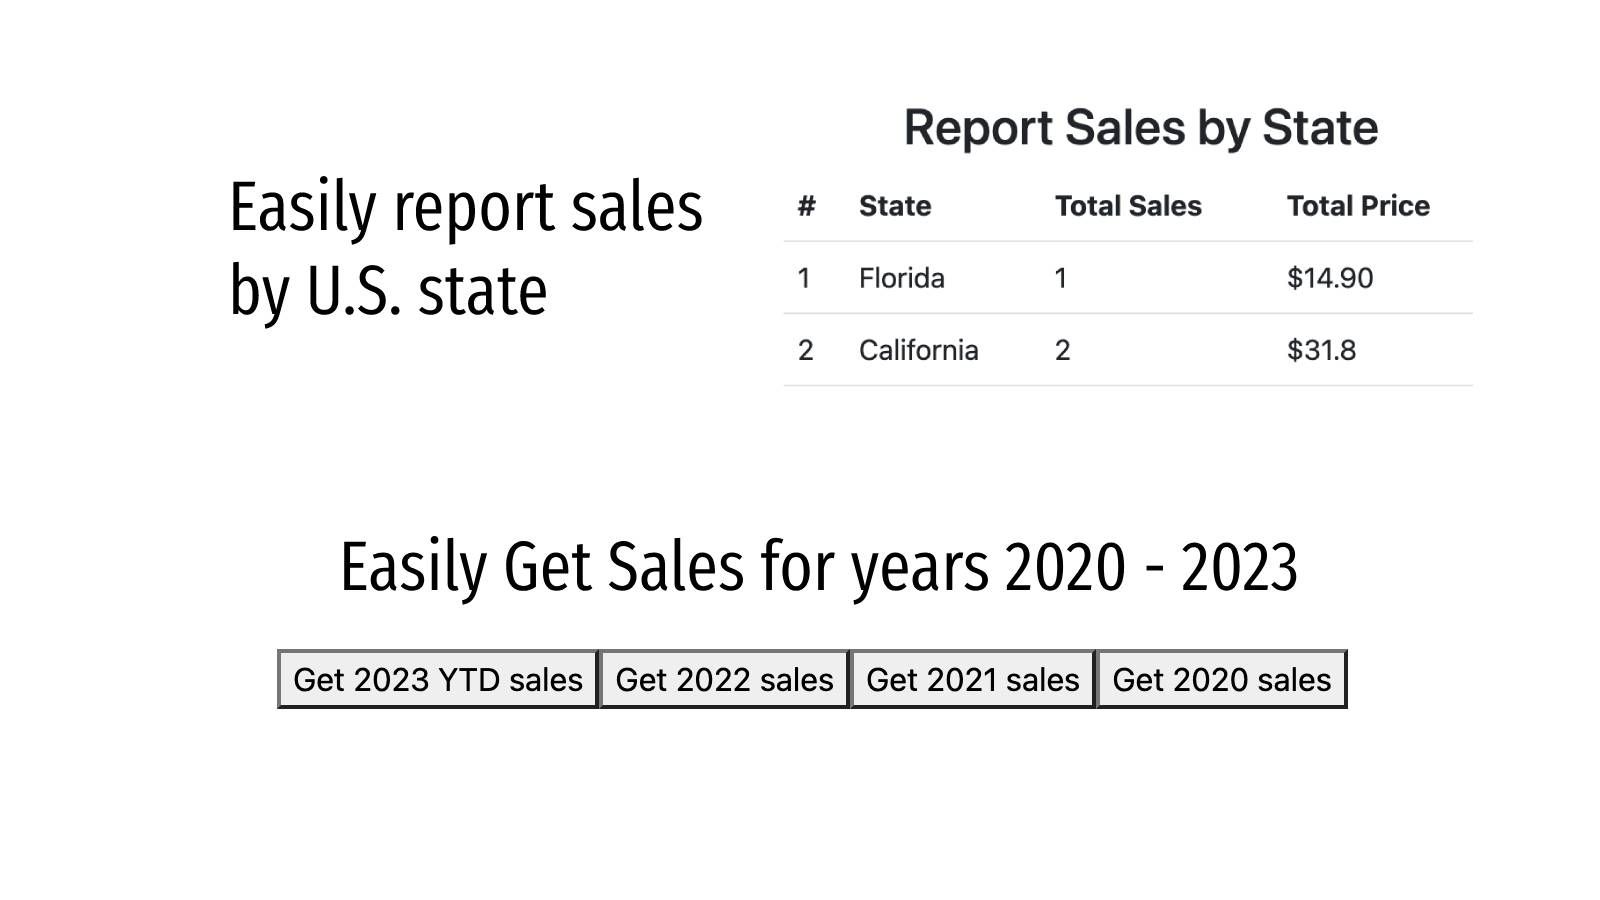 Easily report sales by U.S. state